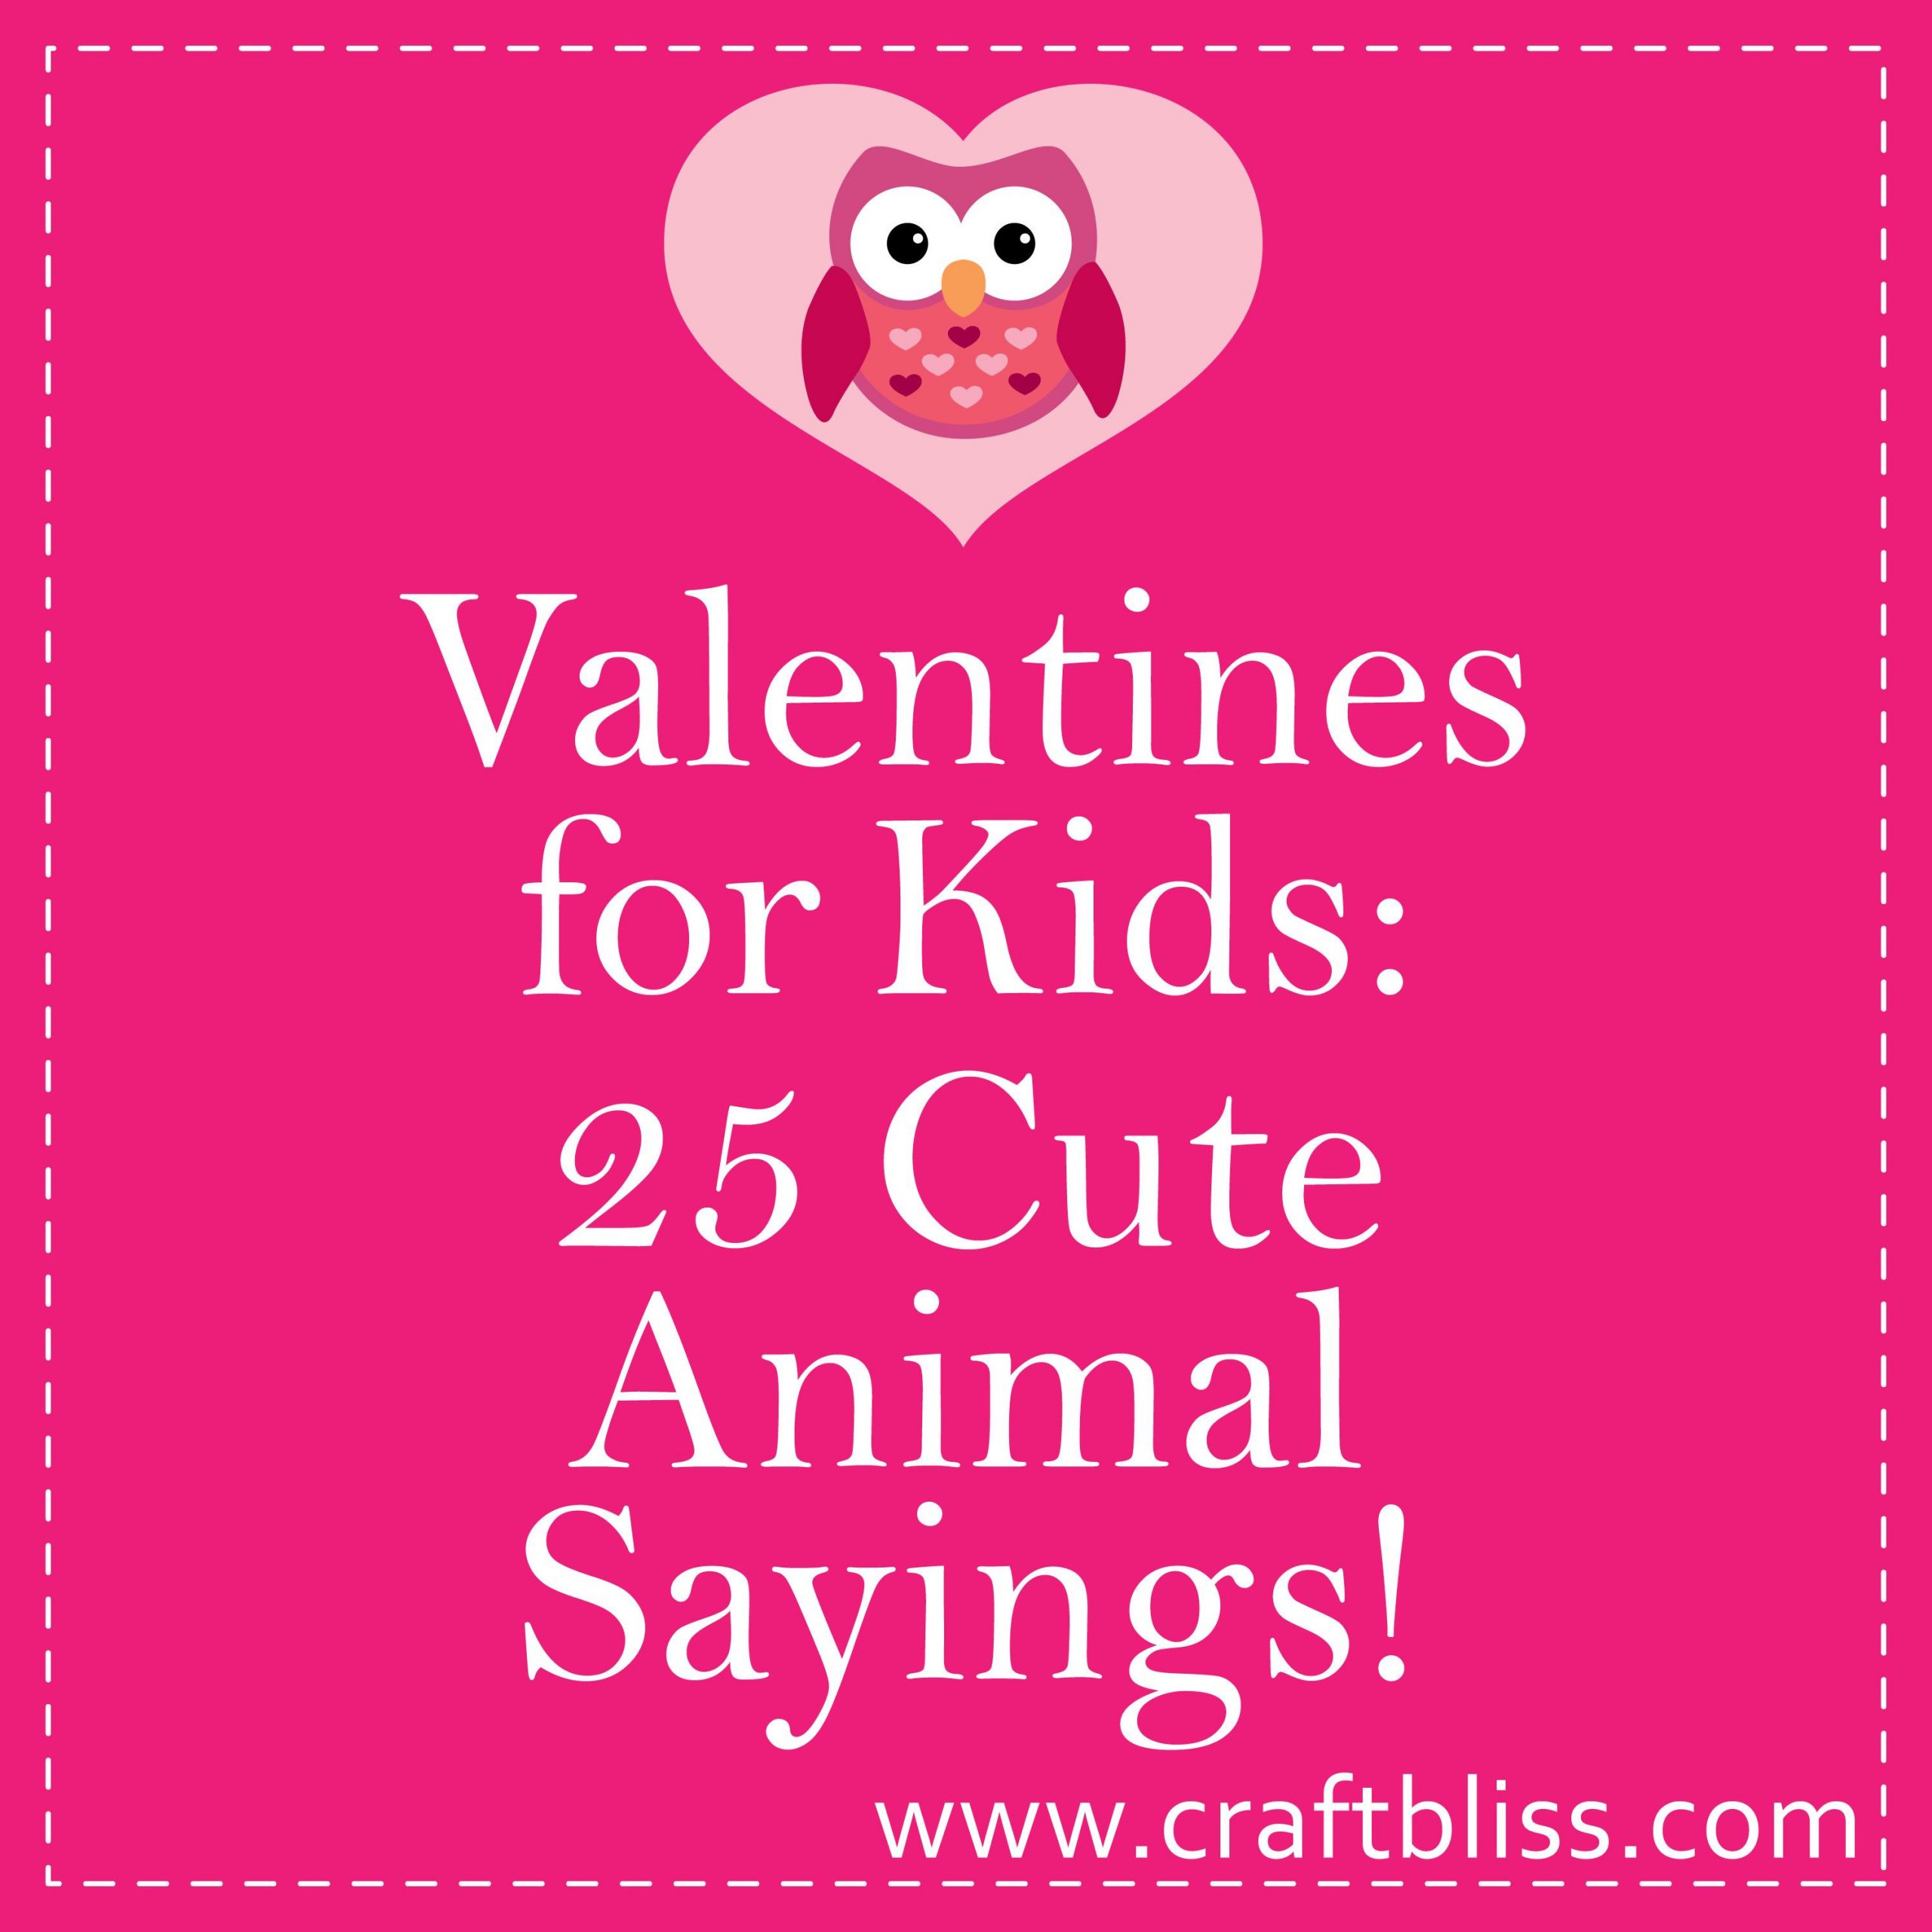 Kids Valentines Quotes
 Valentines for Kids 25 Cute Animal Sayings